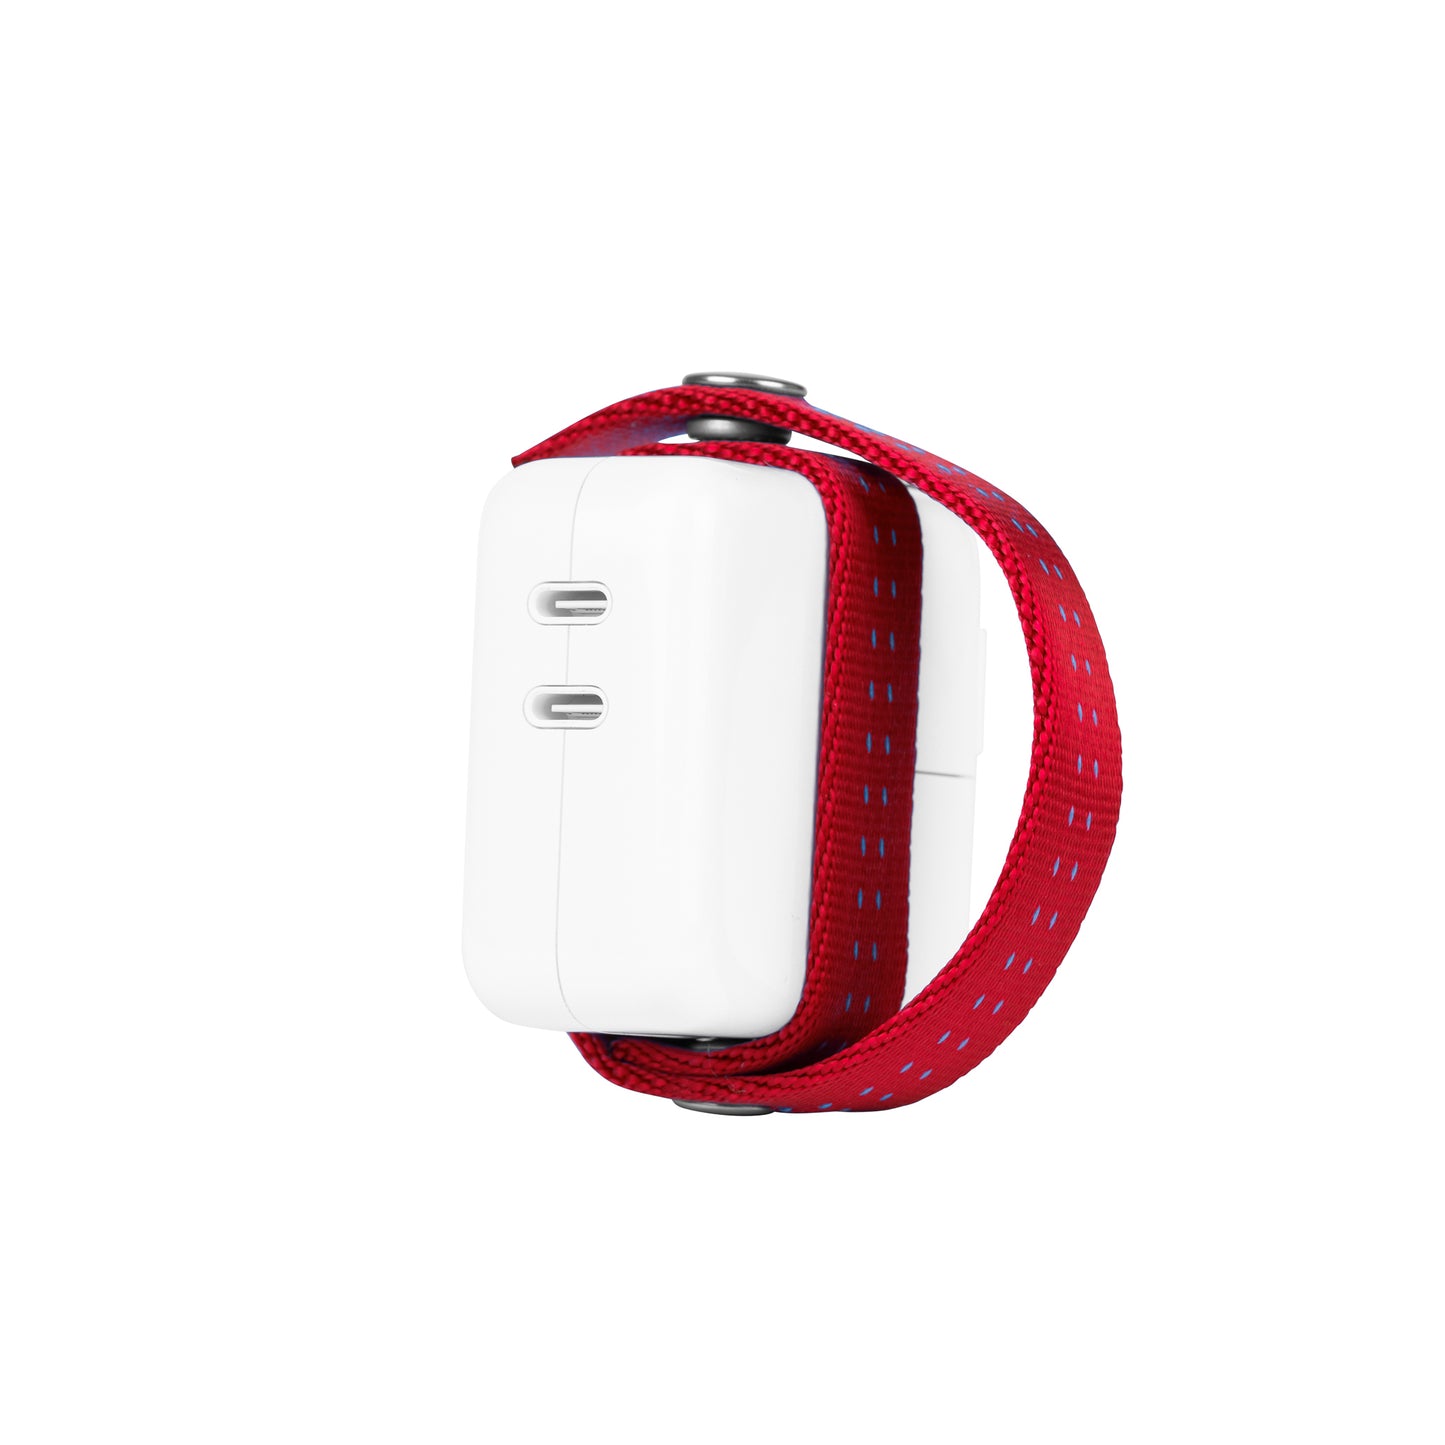 35 Watt Charger Strap - RED